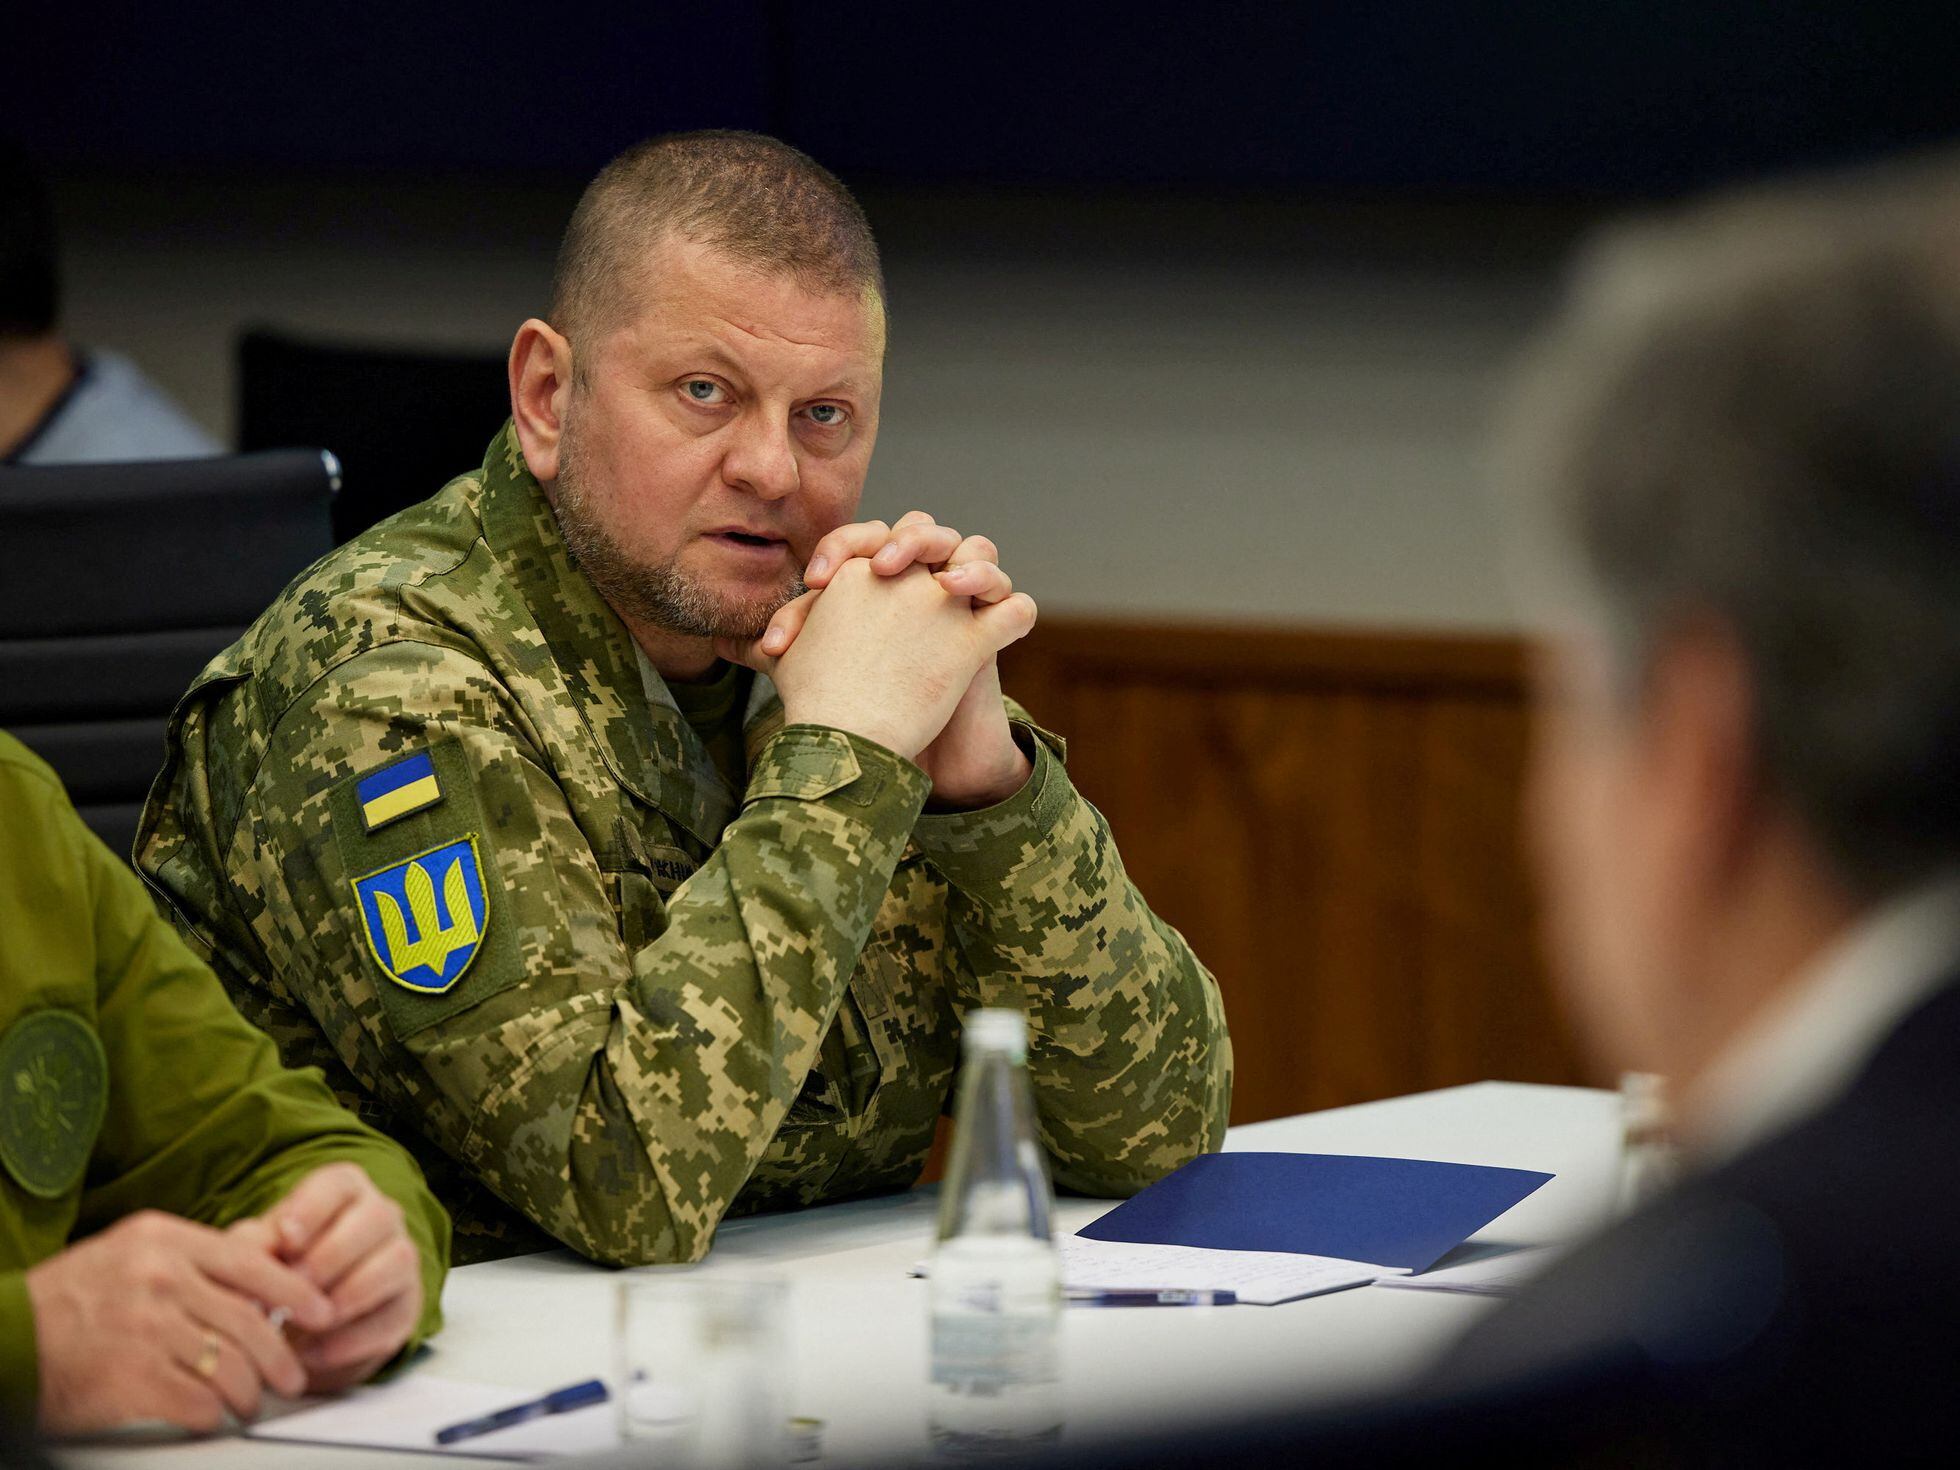 Trained by Moscow and NATO and hardened in Donbas: The generals who  ouftoxed Putin's forces in Ukraine | International | EL PAÍS English Edition